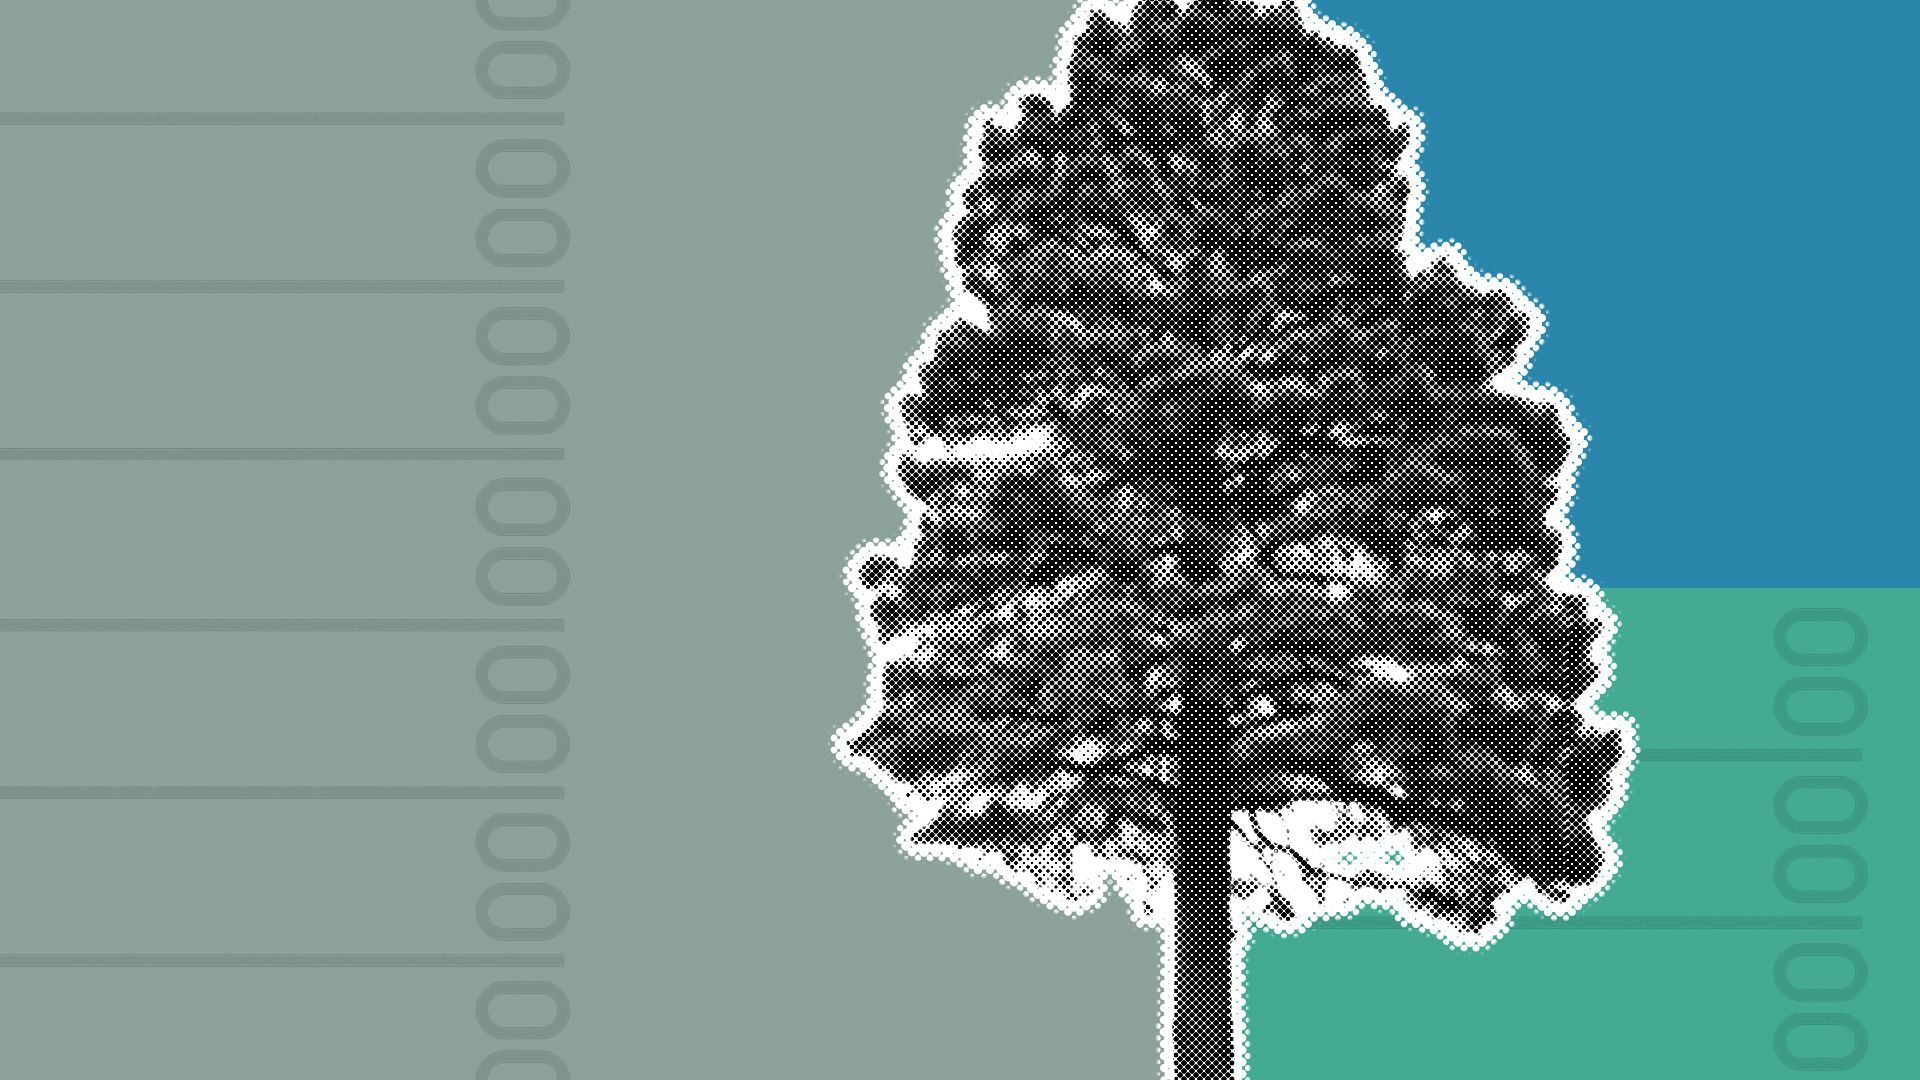 Illustration of a tree with shapes and ballot elements behind it